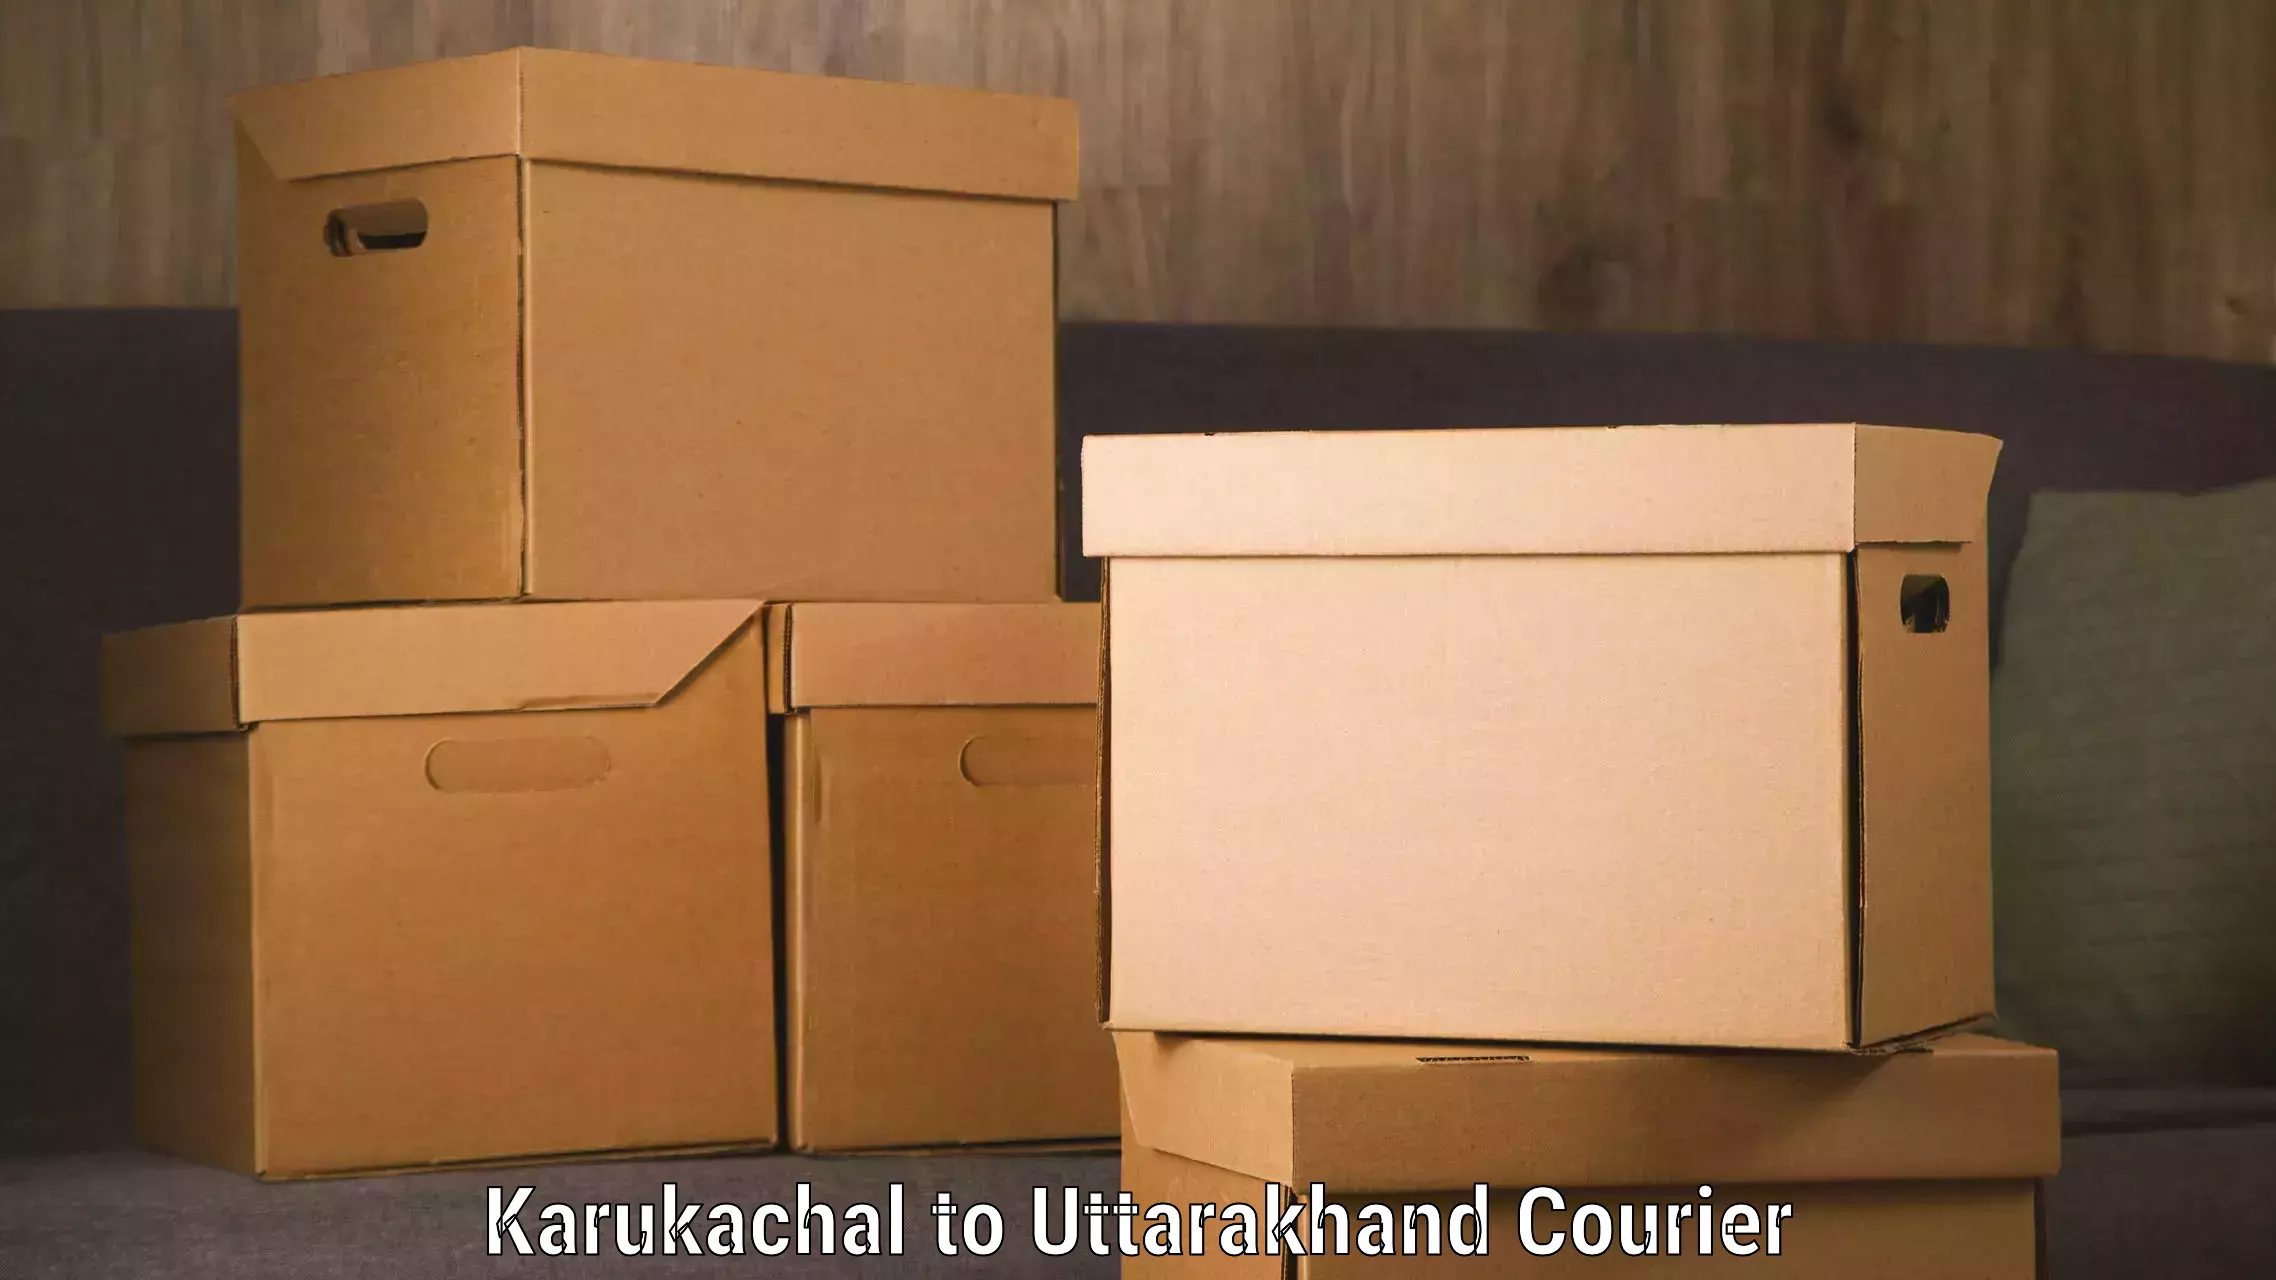 Flexible delivery schedules Karukachal to Lansdowne